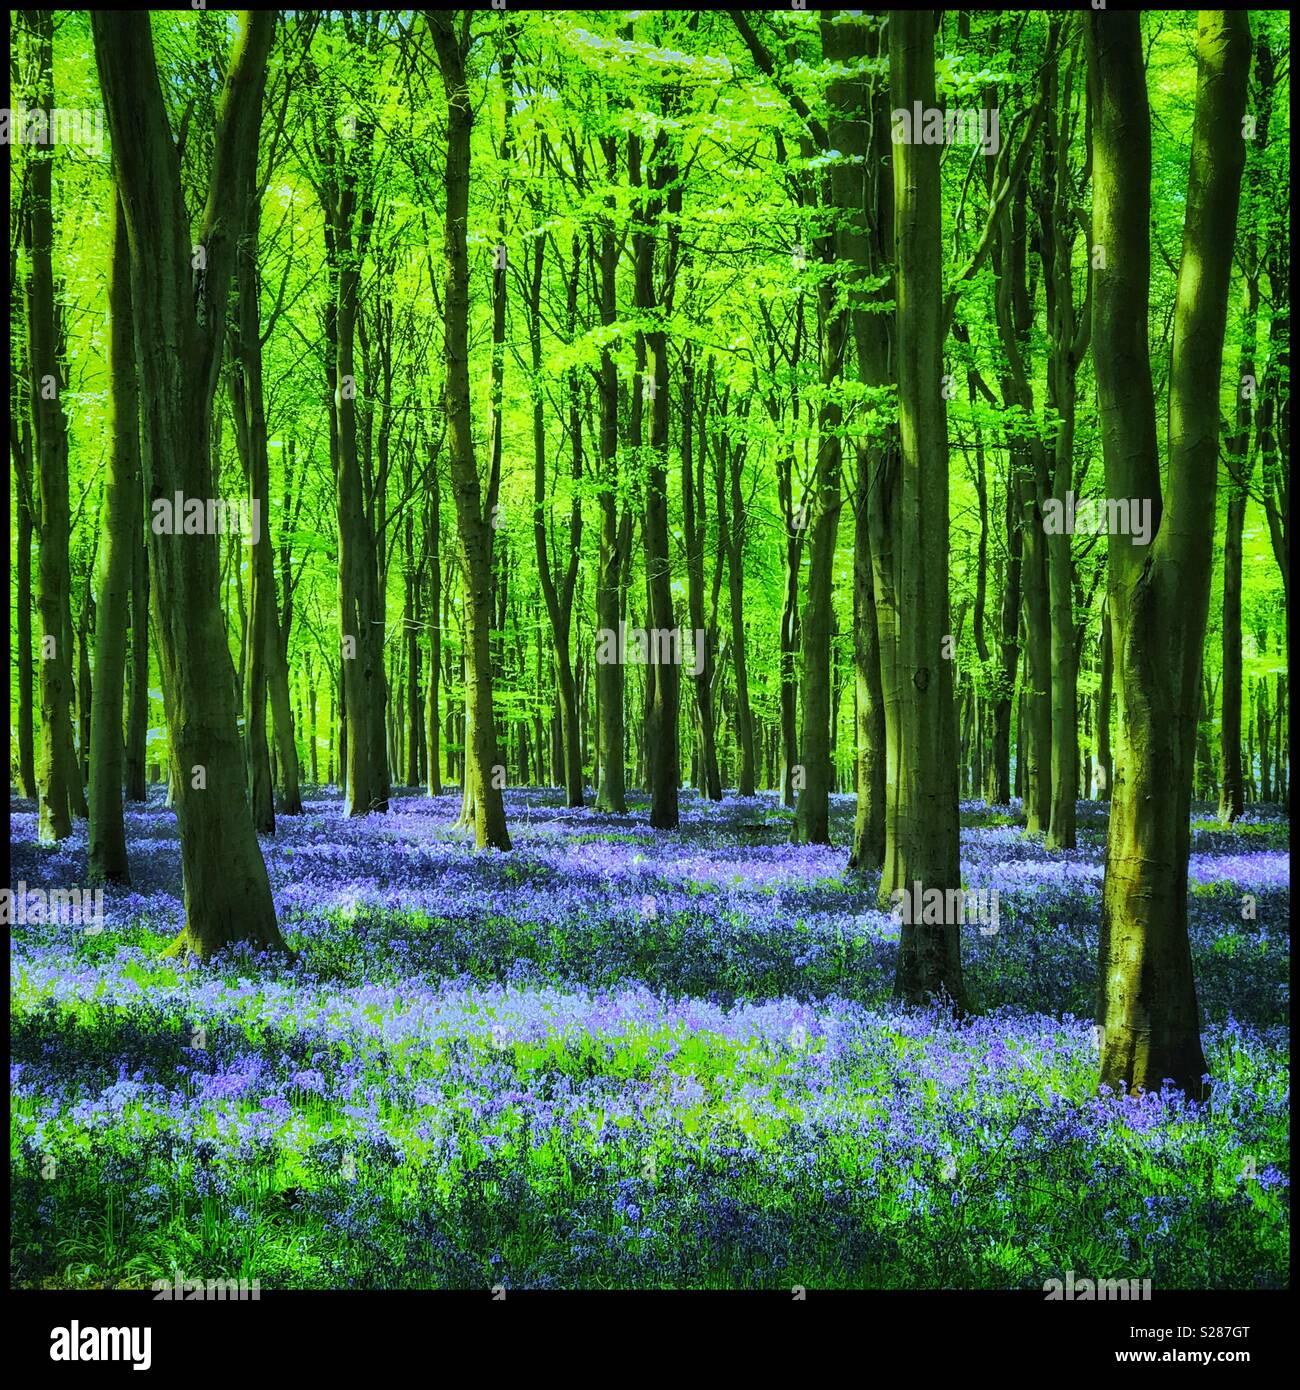 A fantastic Spring woodland scene in England - the Bluebells are in full bloom creating a carpet of purple. The bluebell flower (Hyacinthoides non-Scripta) has been voted the UK’s favourite flower. Stock Photo